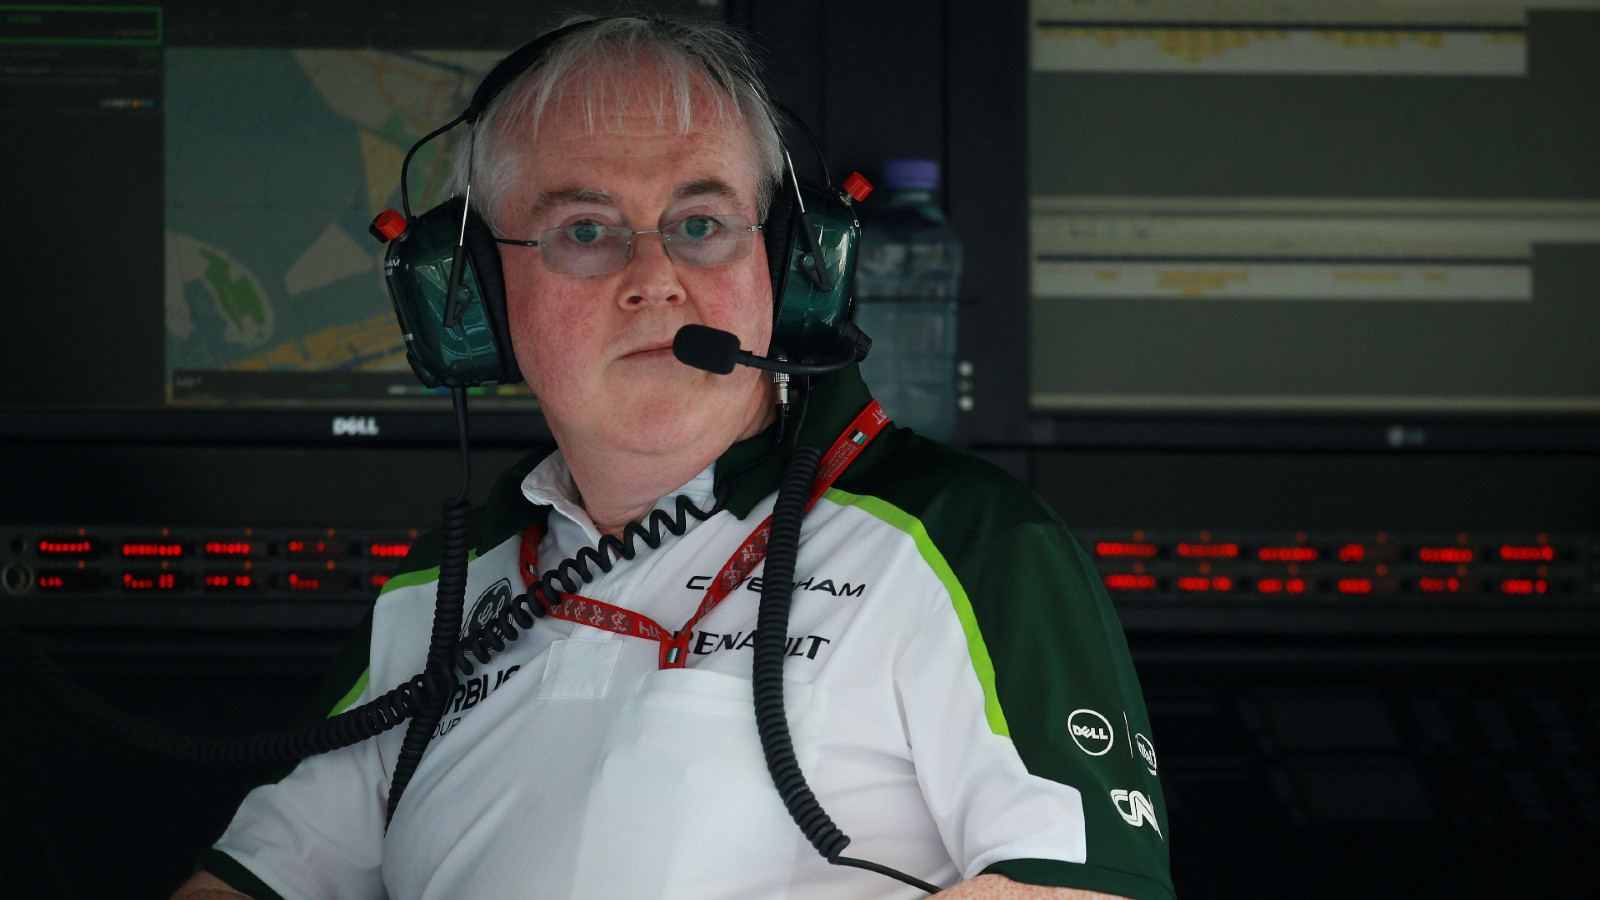 Caterham's Finbarr O' Connell on the pitwall. Abu Dhabi, November 2014.